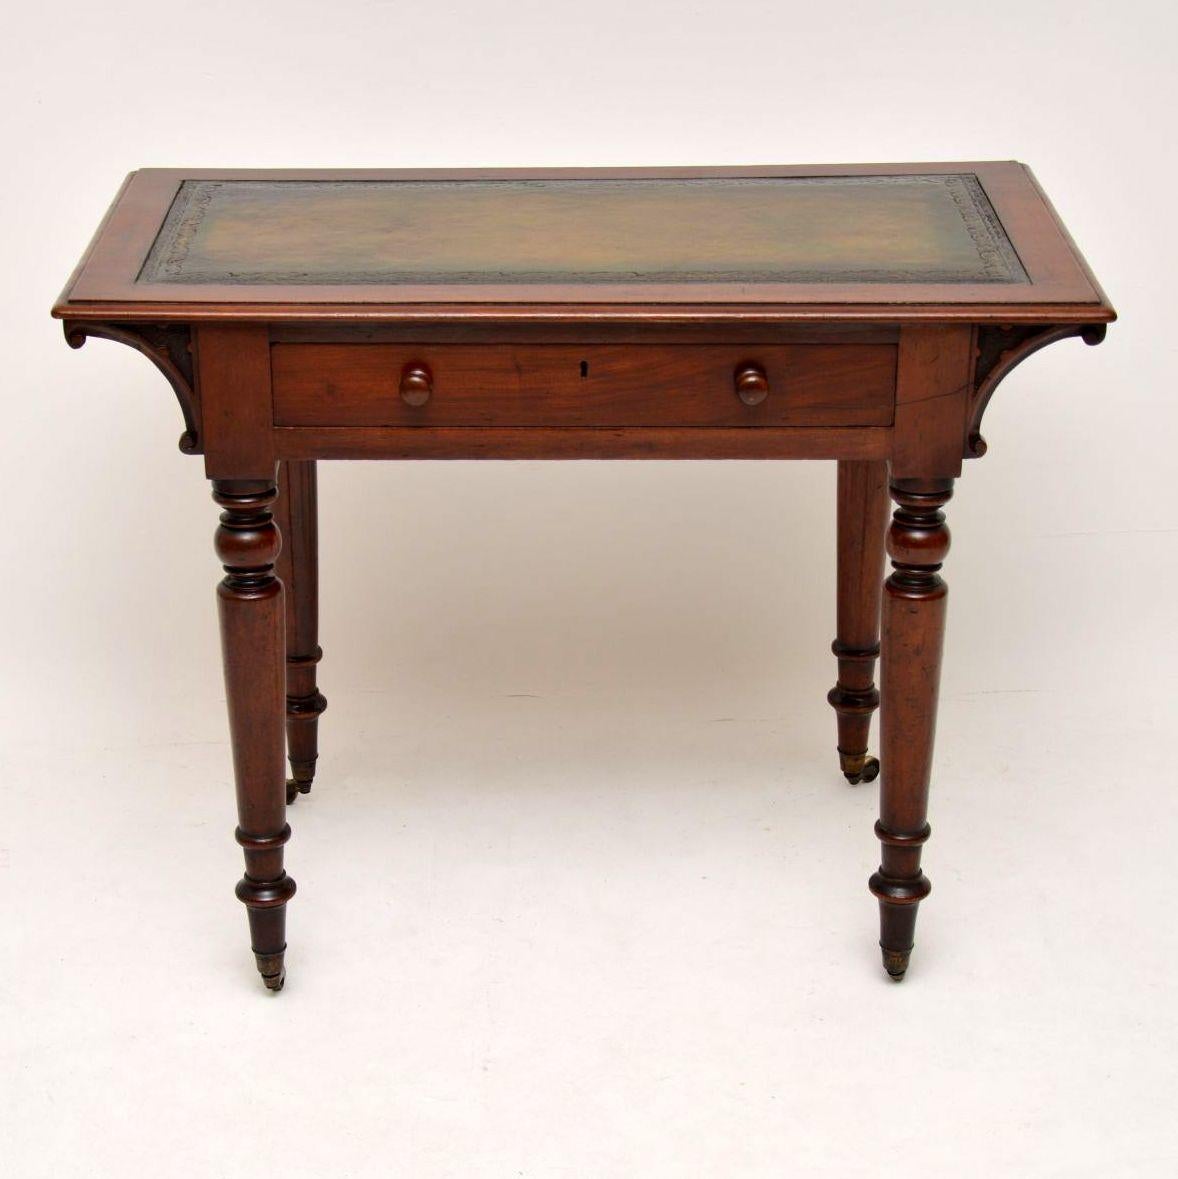 Antique William IV mahogany writing table in good original condition and with a lot of character. It has a tooled leather writings surface and a polished back. The single drawer has fine dovetails, a lock and turned bun handles. It has interesting